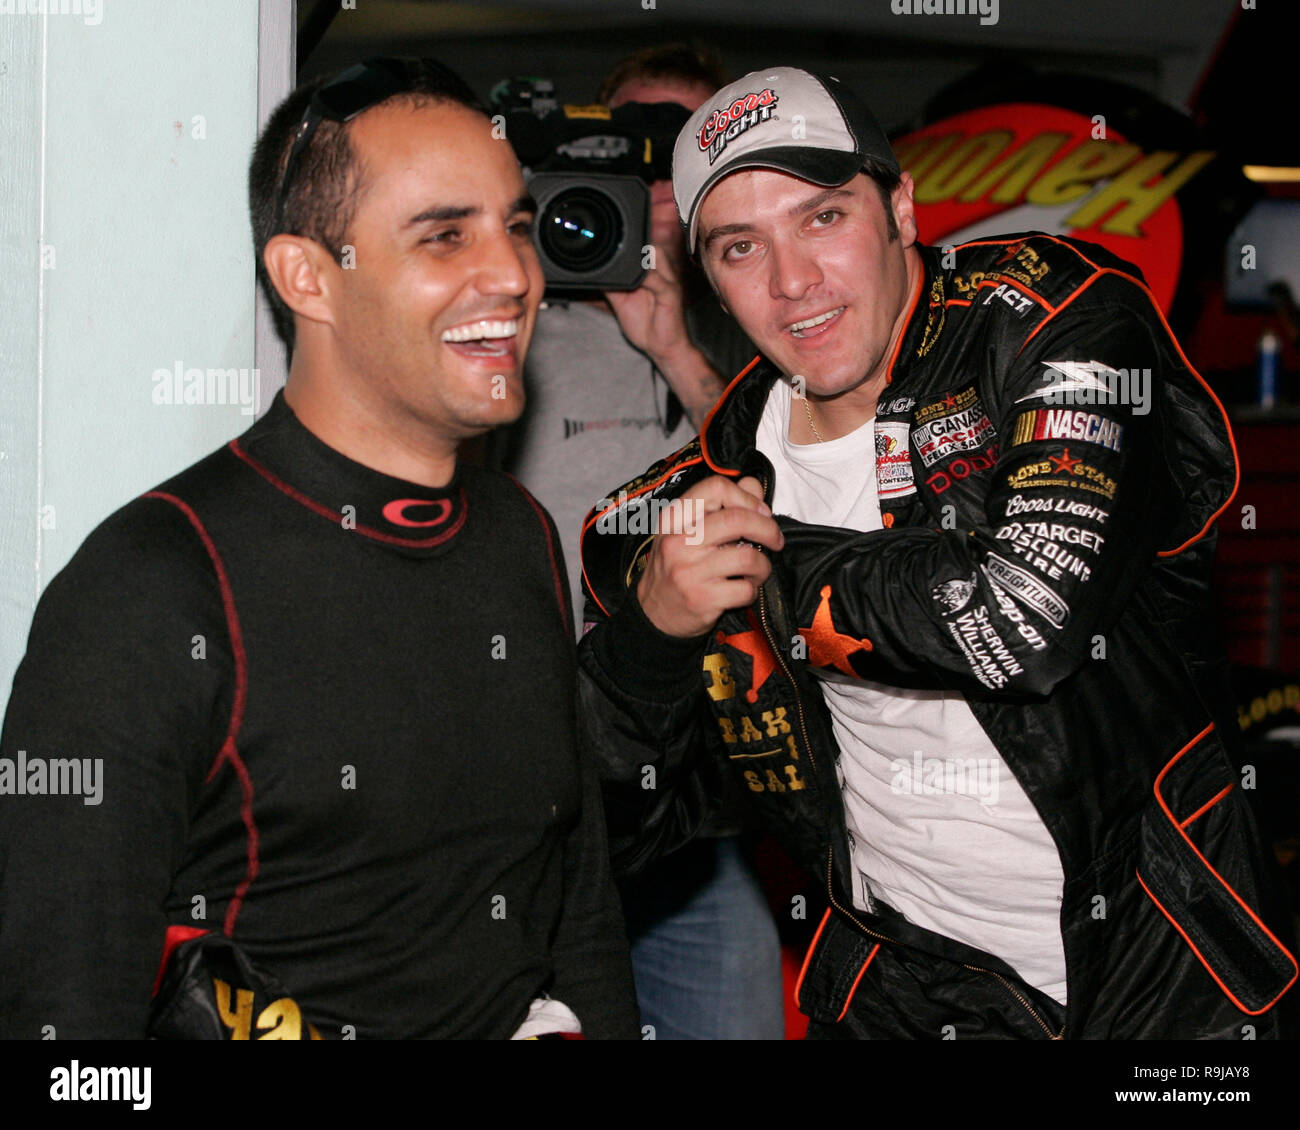 Juan Pablo Montoya (L) jokes with teammate David Stremme as he awaits his turn to test a NASCAR Nextel Cup car after recently signing to drive for Chip Ganassi racing, at Homestead Miami Speedway in Homestead, Florida on October 17, 2006. Stock Photo